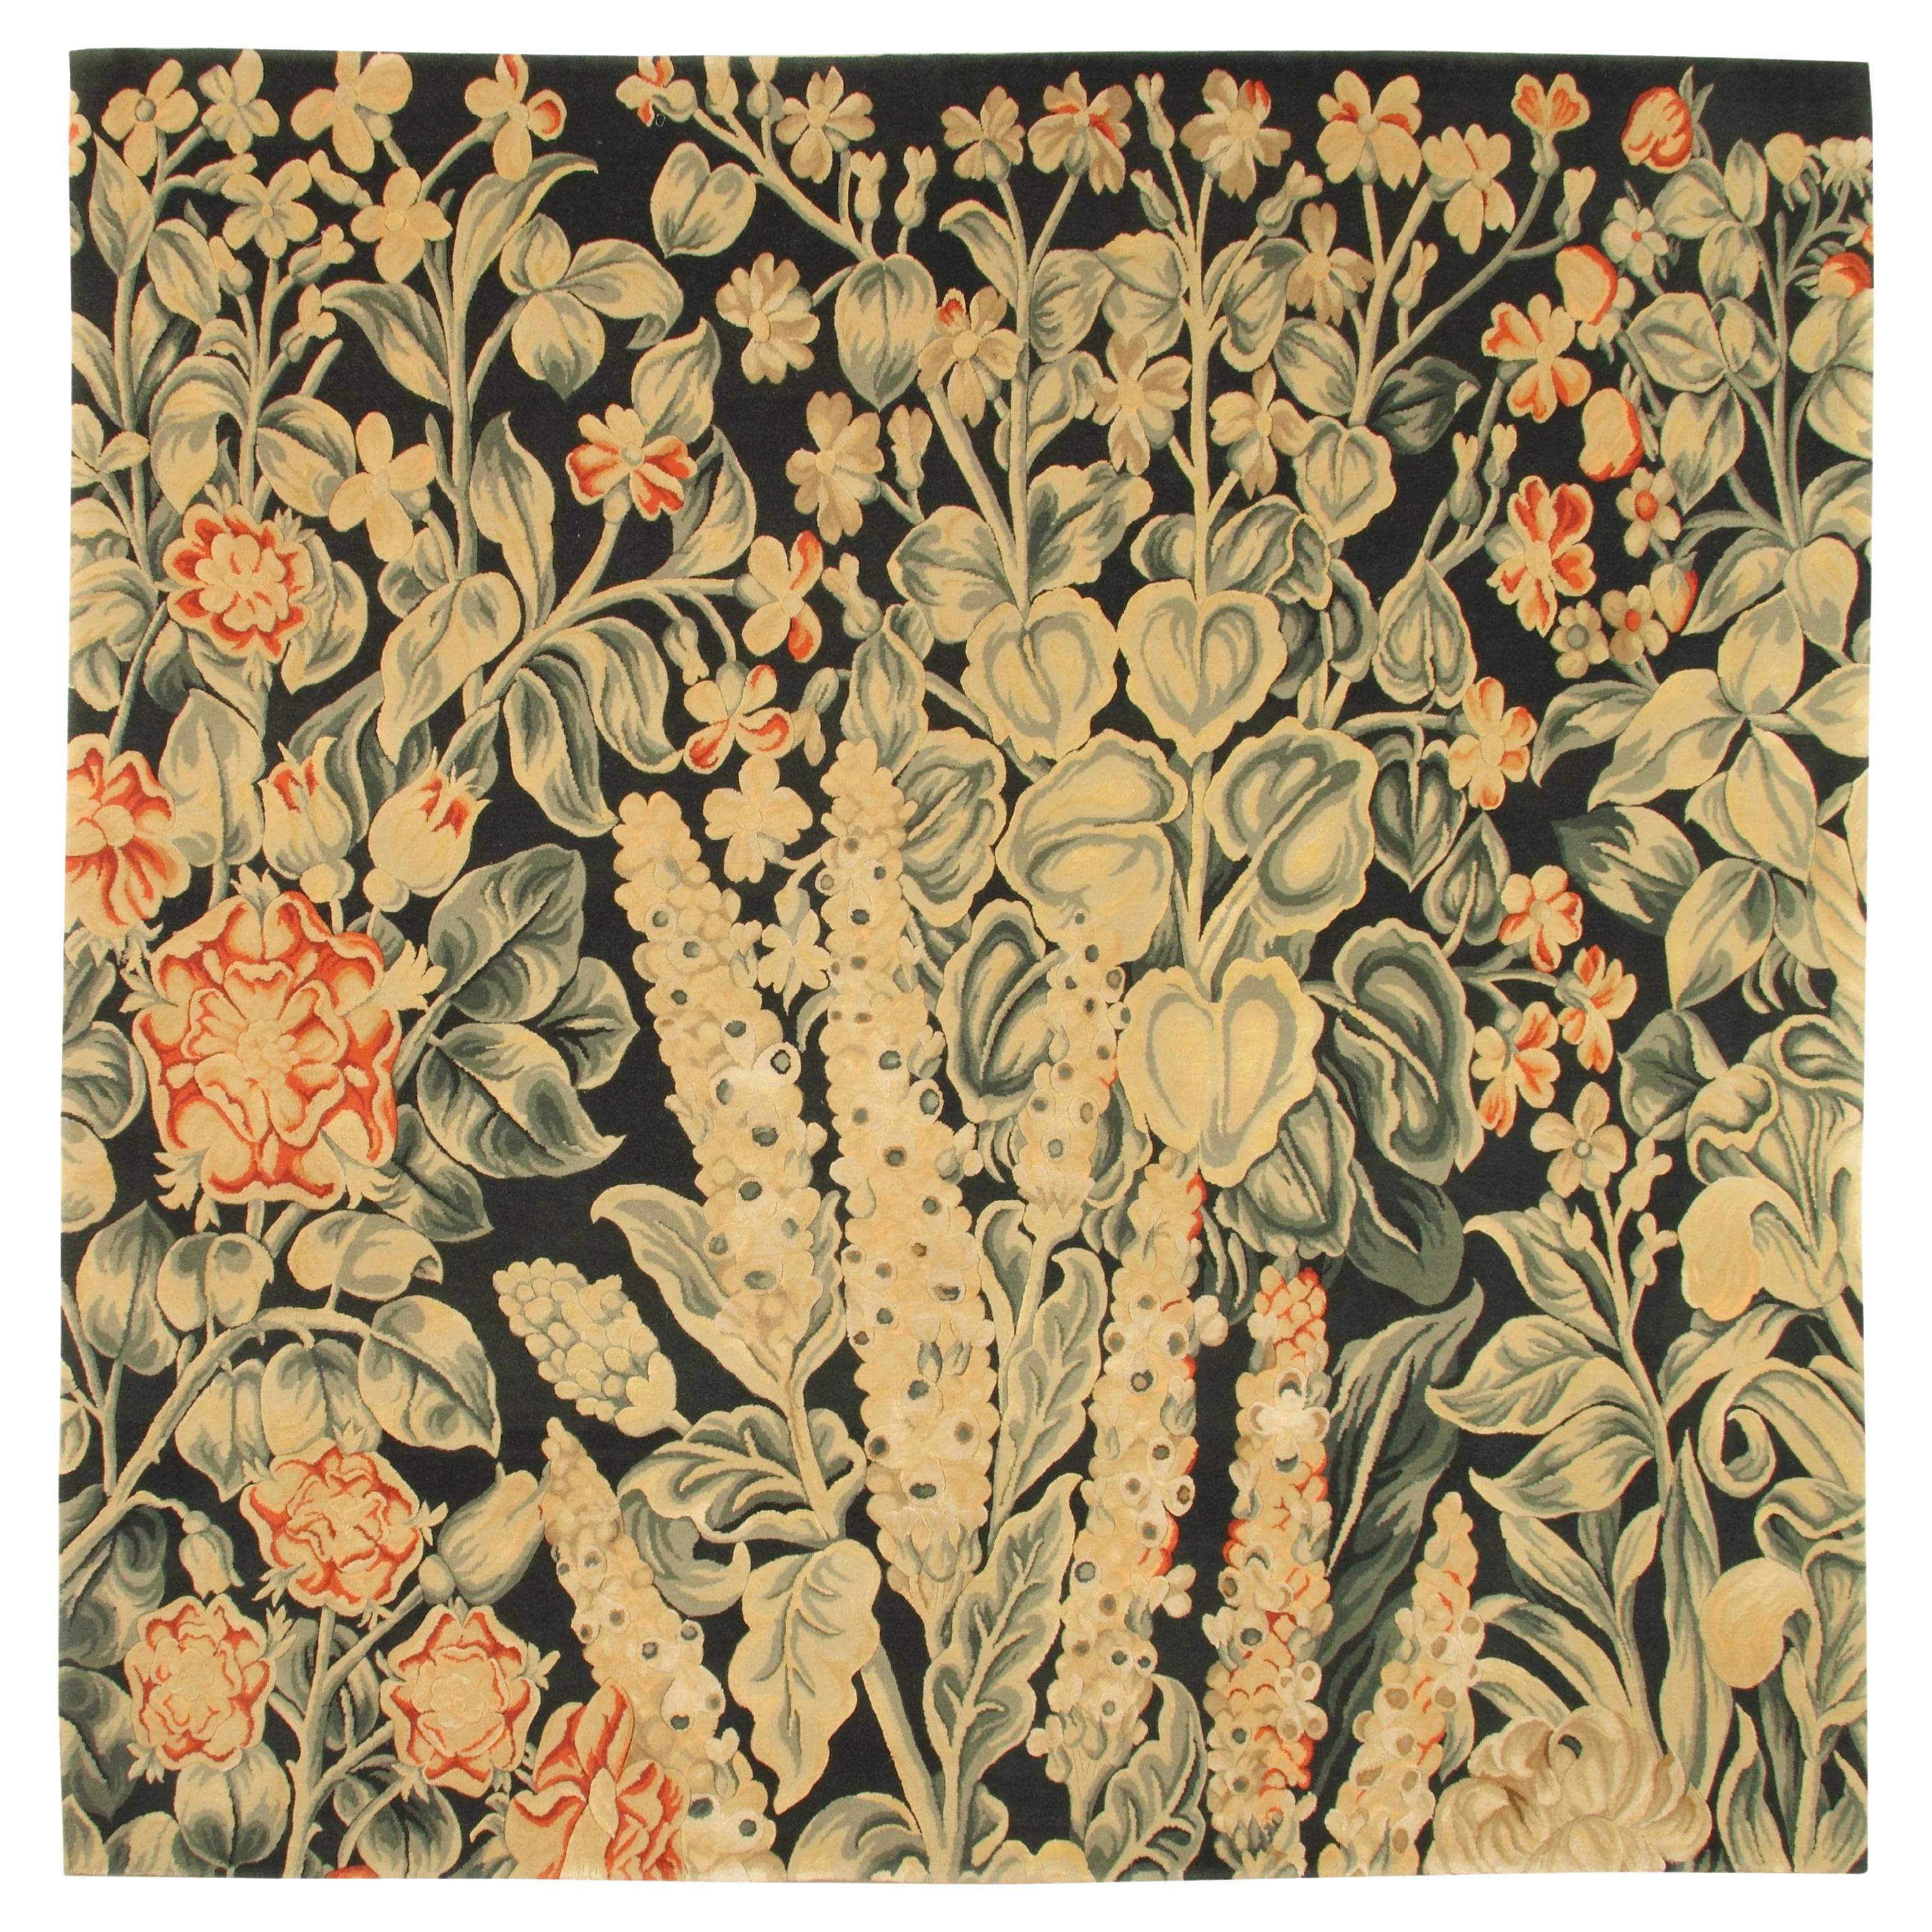 VIACOMO 'Tapisserie' Rug Hand Knotted Wool Silk One of a Kind Carpet 7 x 7 ft For Sale